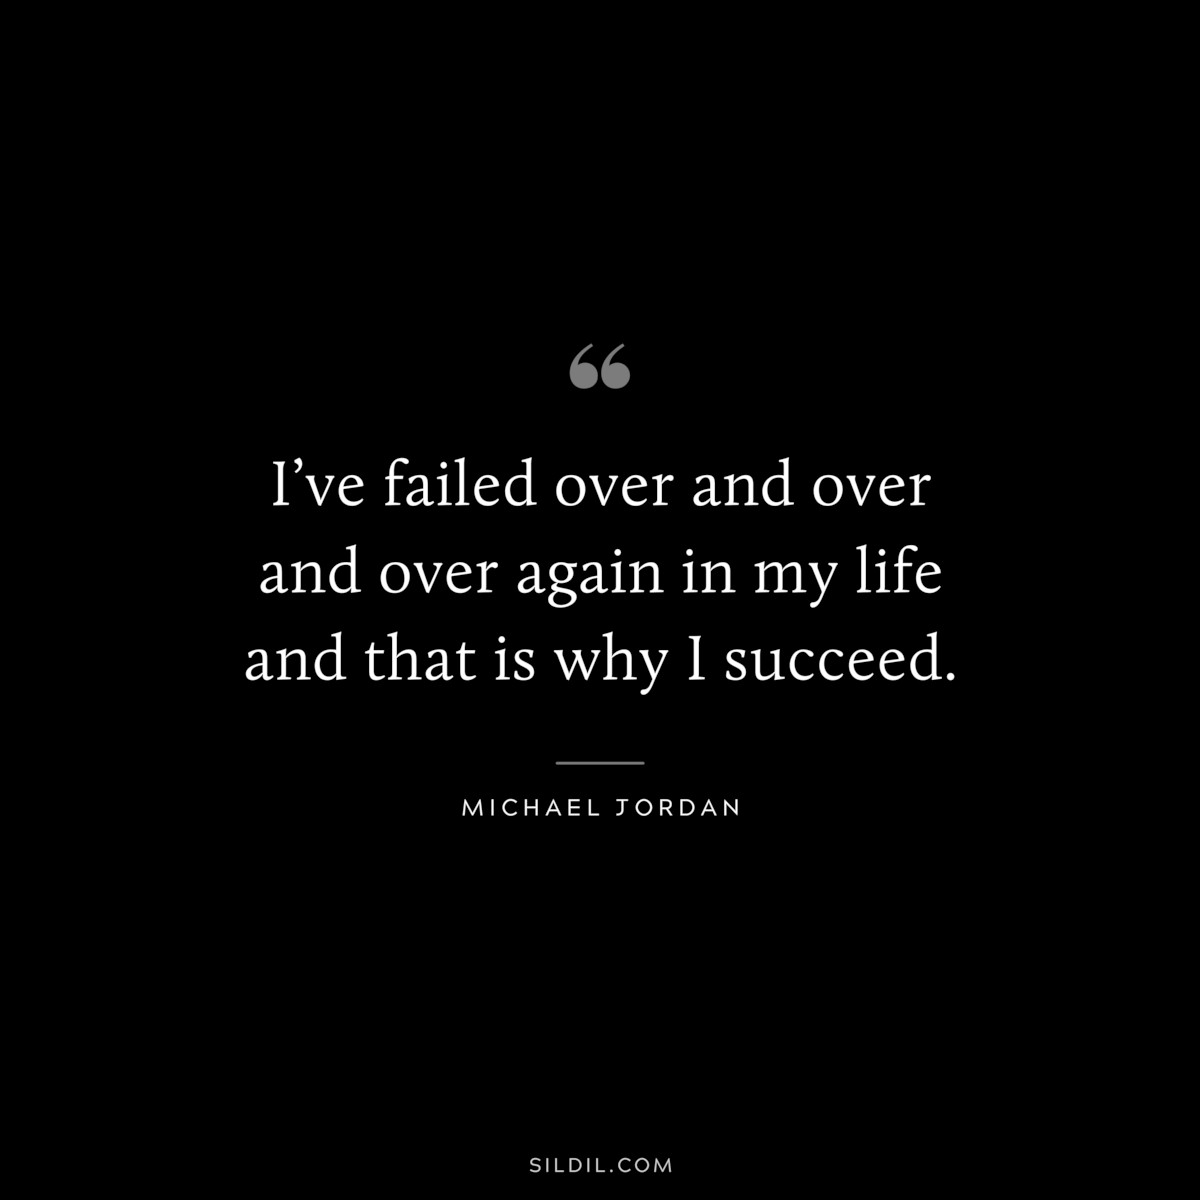 I’ve failed over and over and over again in my life and that is why I succeed. ― Michael Jordan